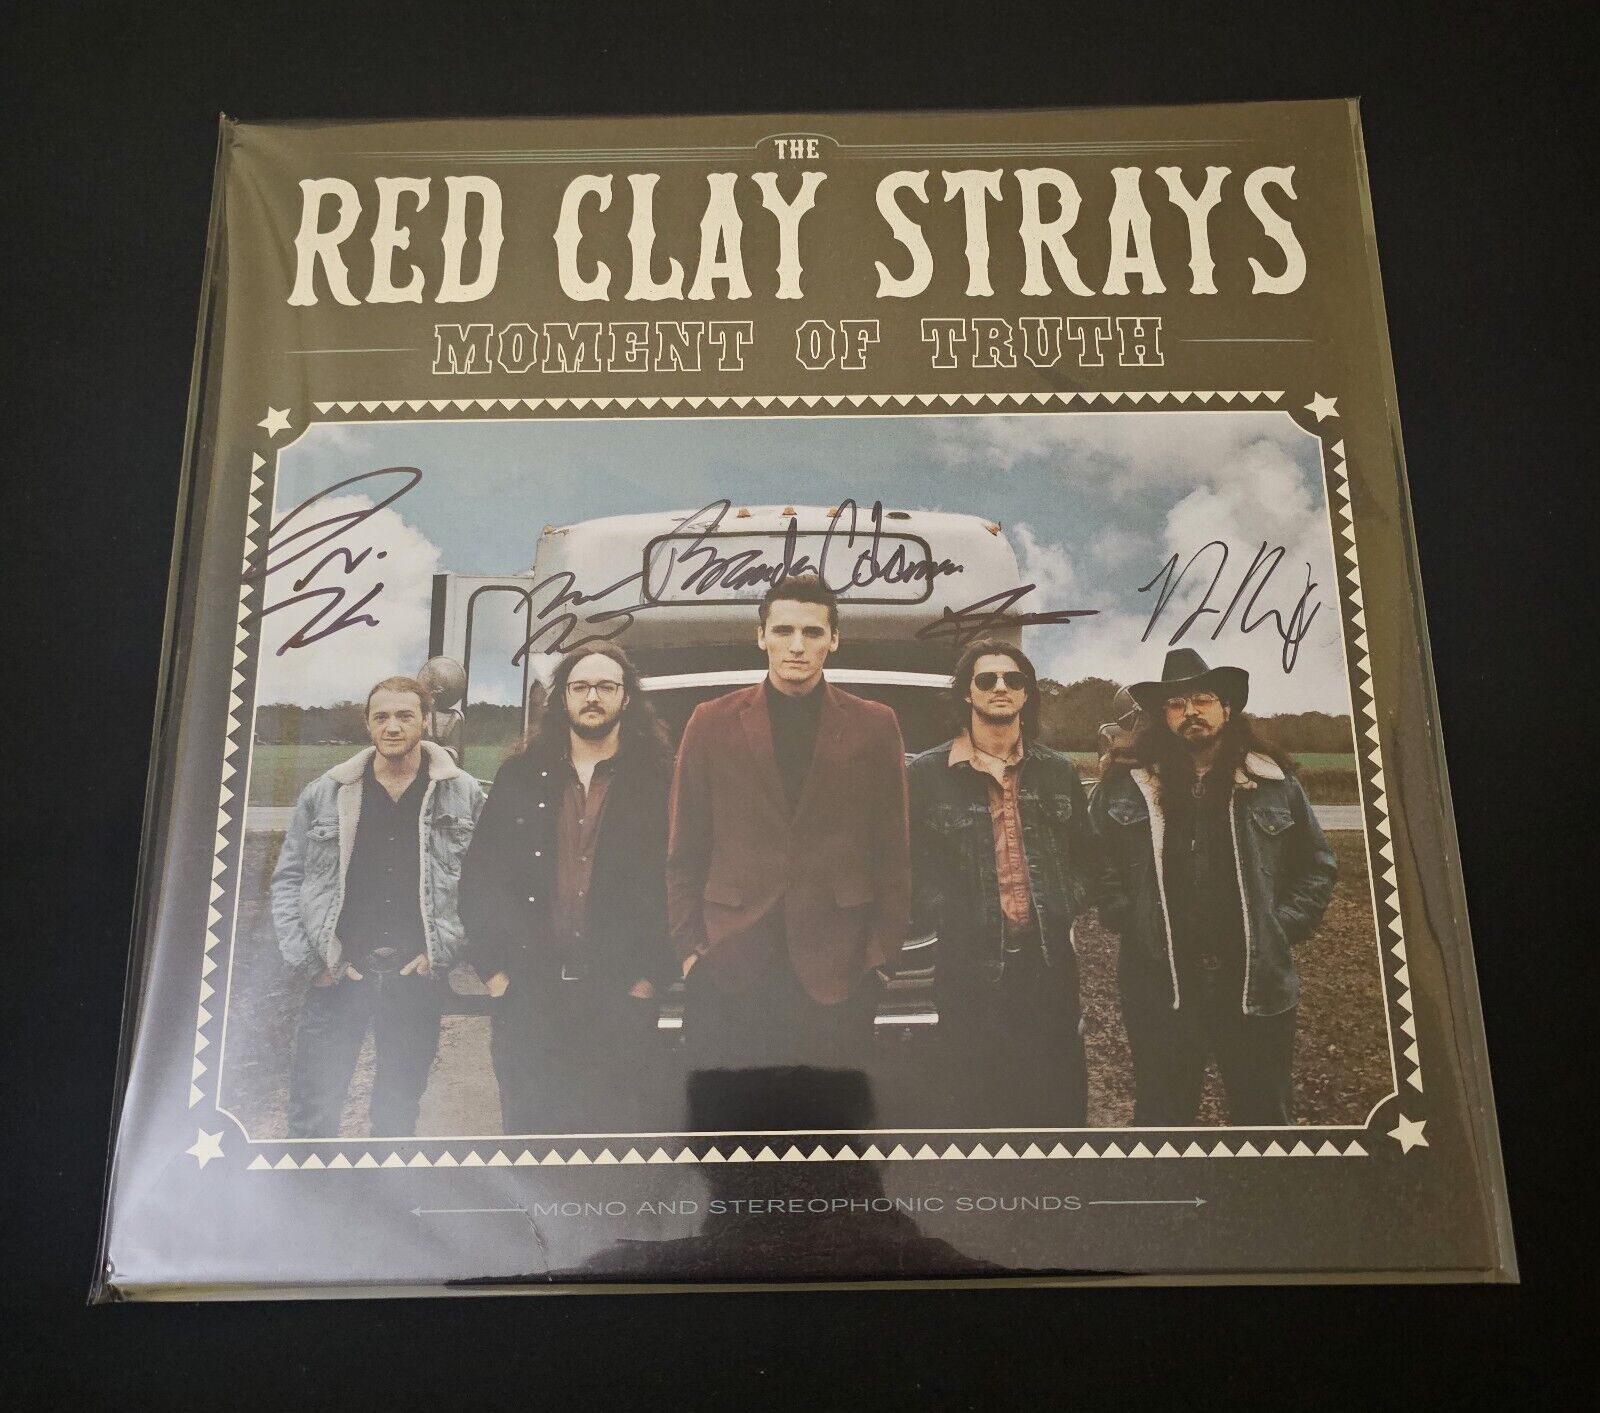 The Red Clay Strays - Moment of Truth SIGNED Debut LP - Autographed Vinyl - NEW